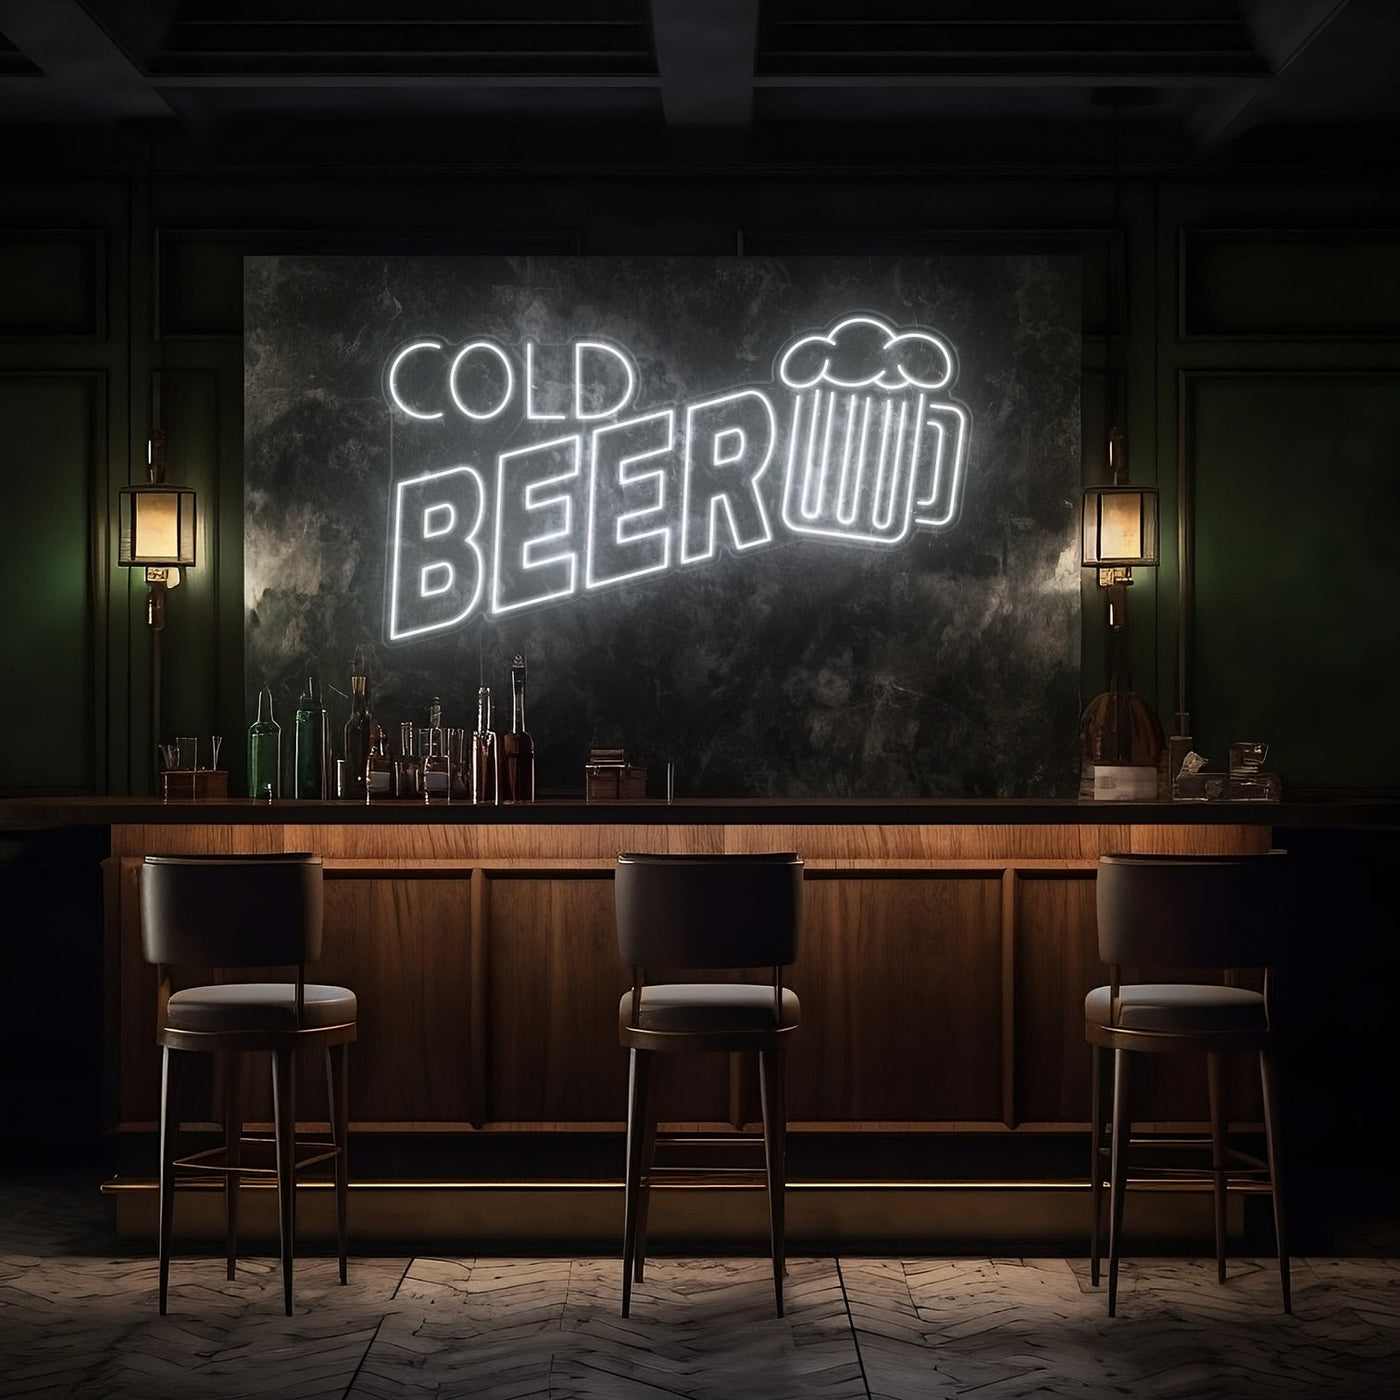 Cold Beer Bar LED Neon Sign - 30 InchTurquoise